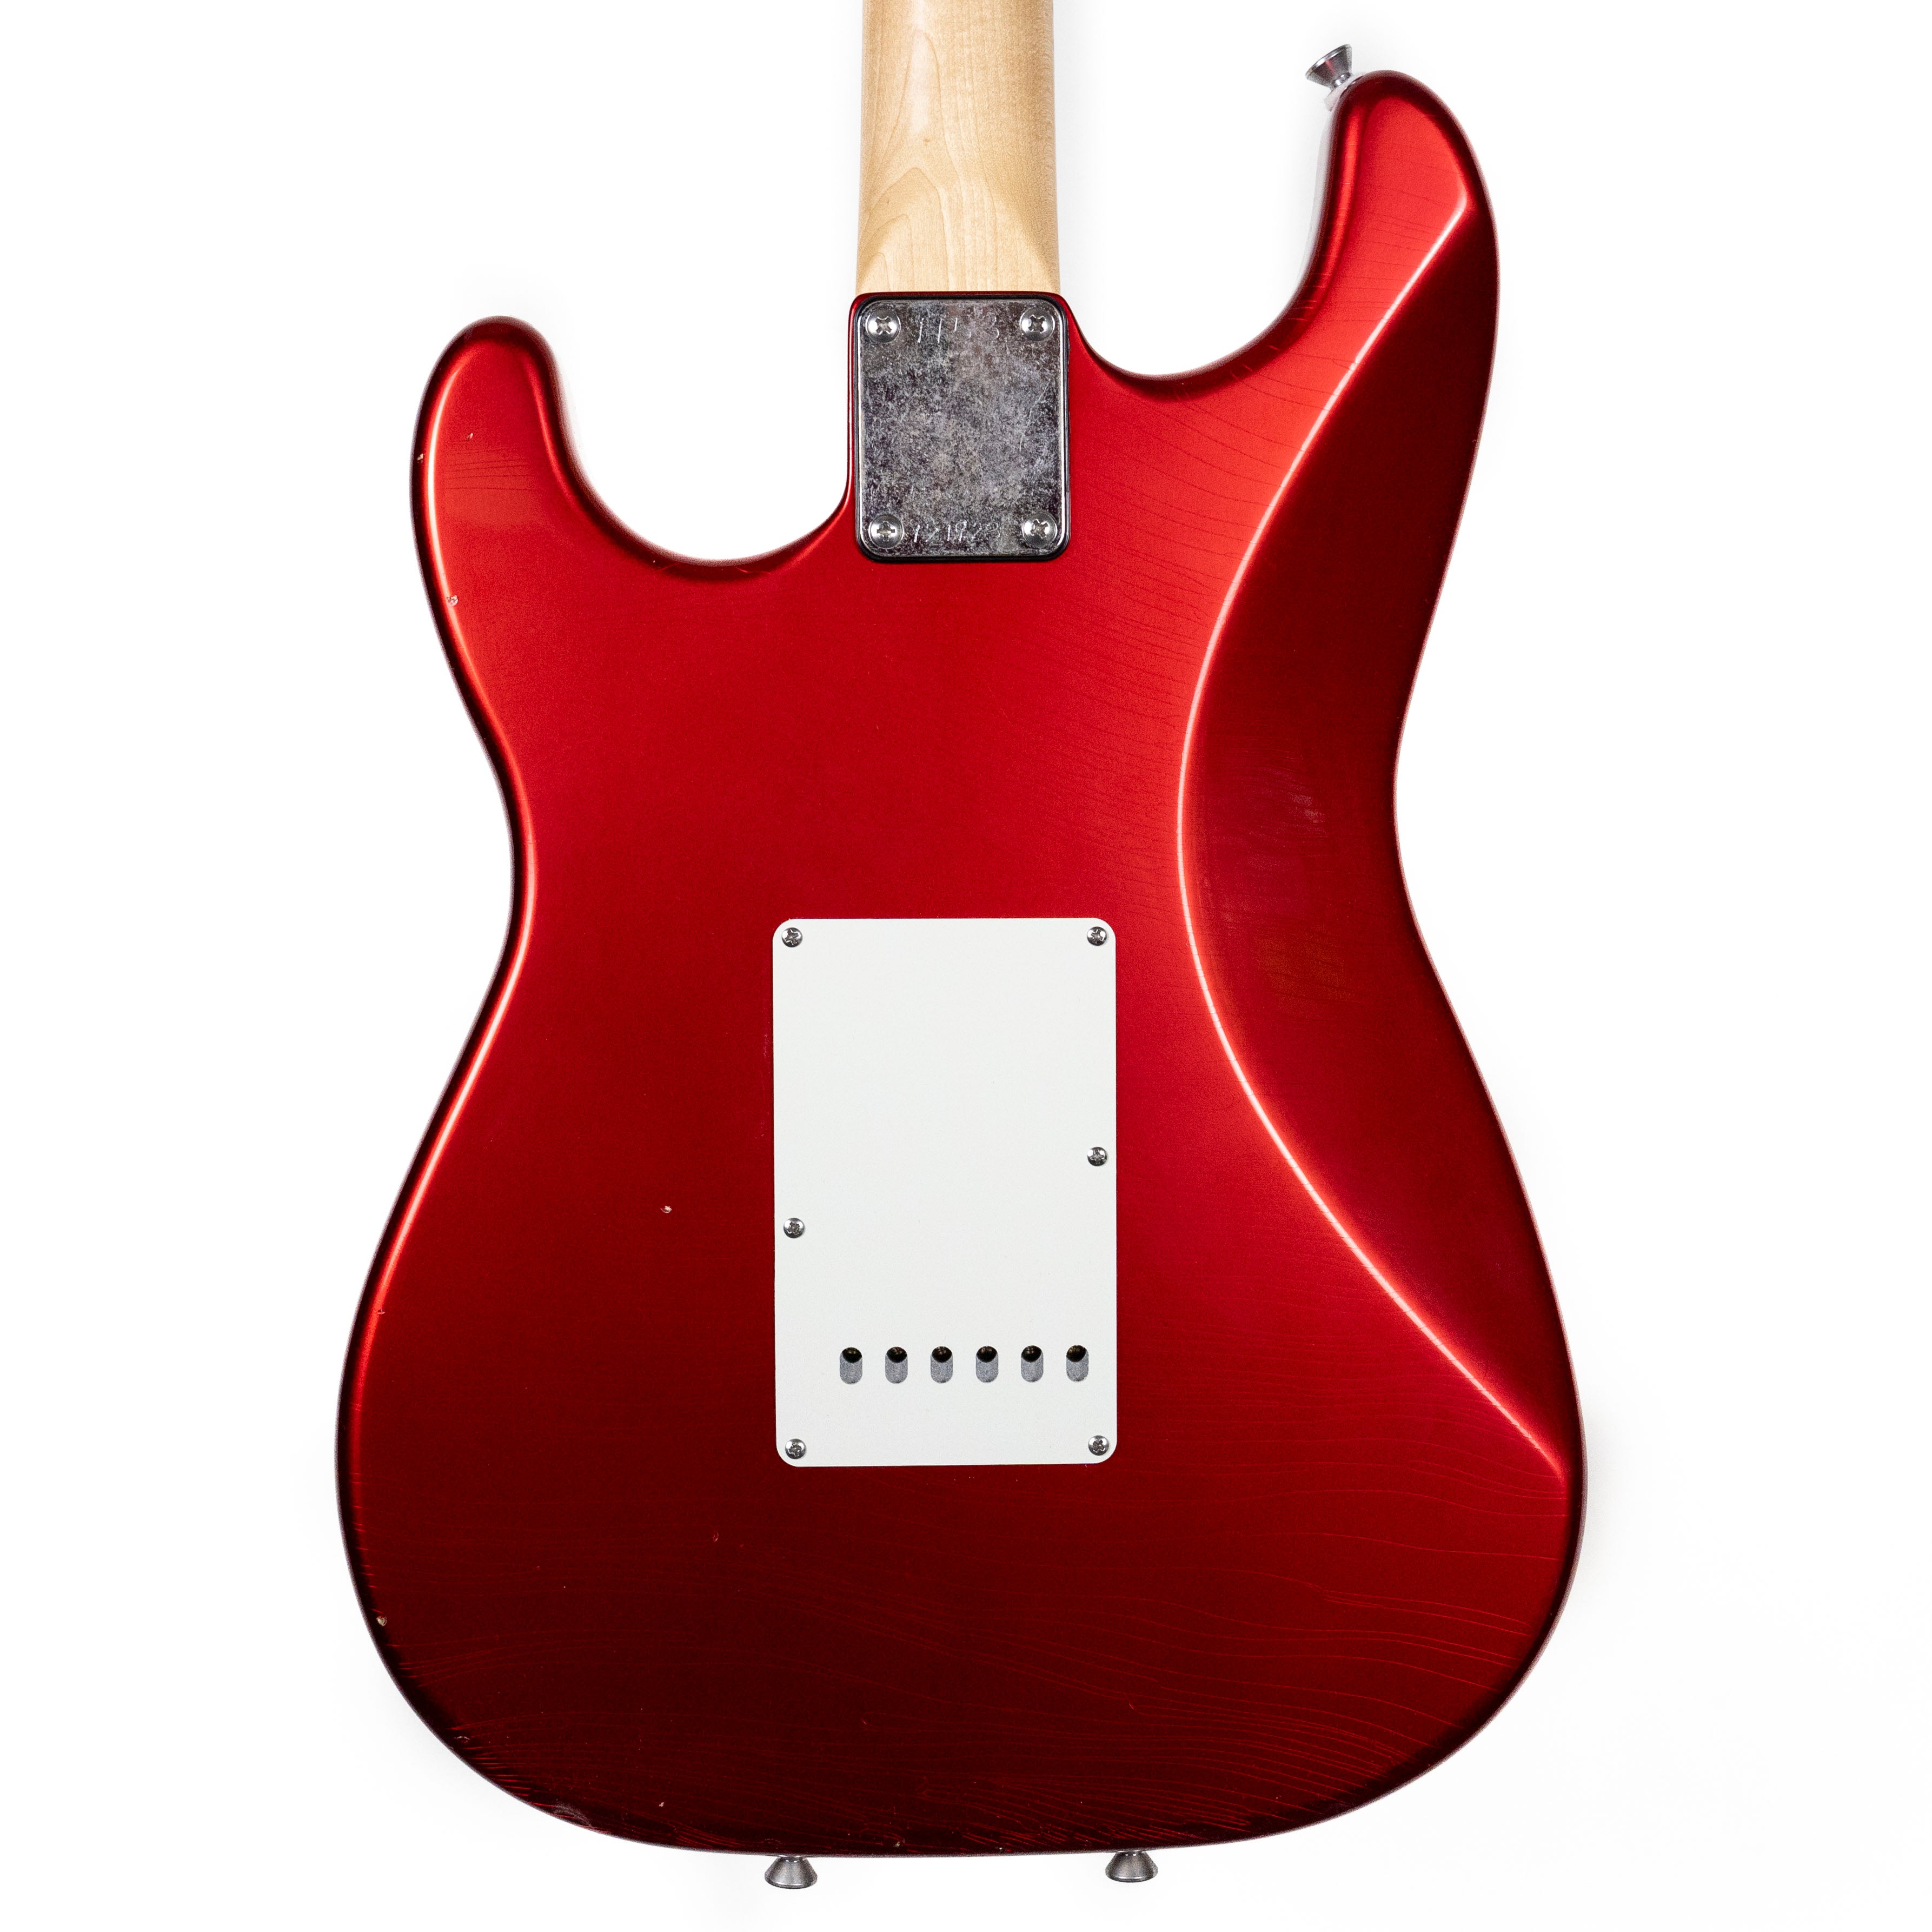 Pensa MK-80 Aged Candy Apple Red